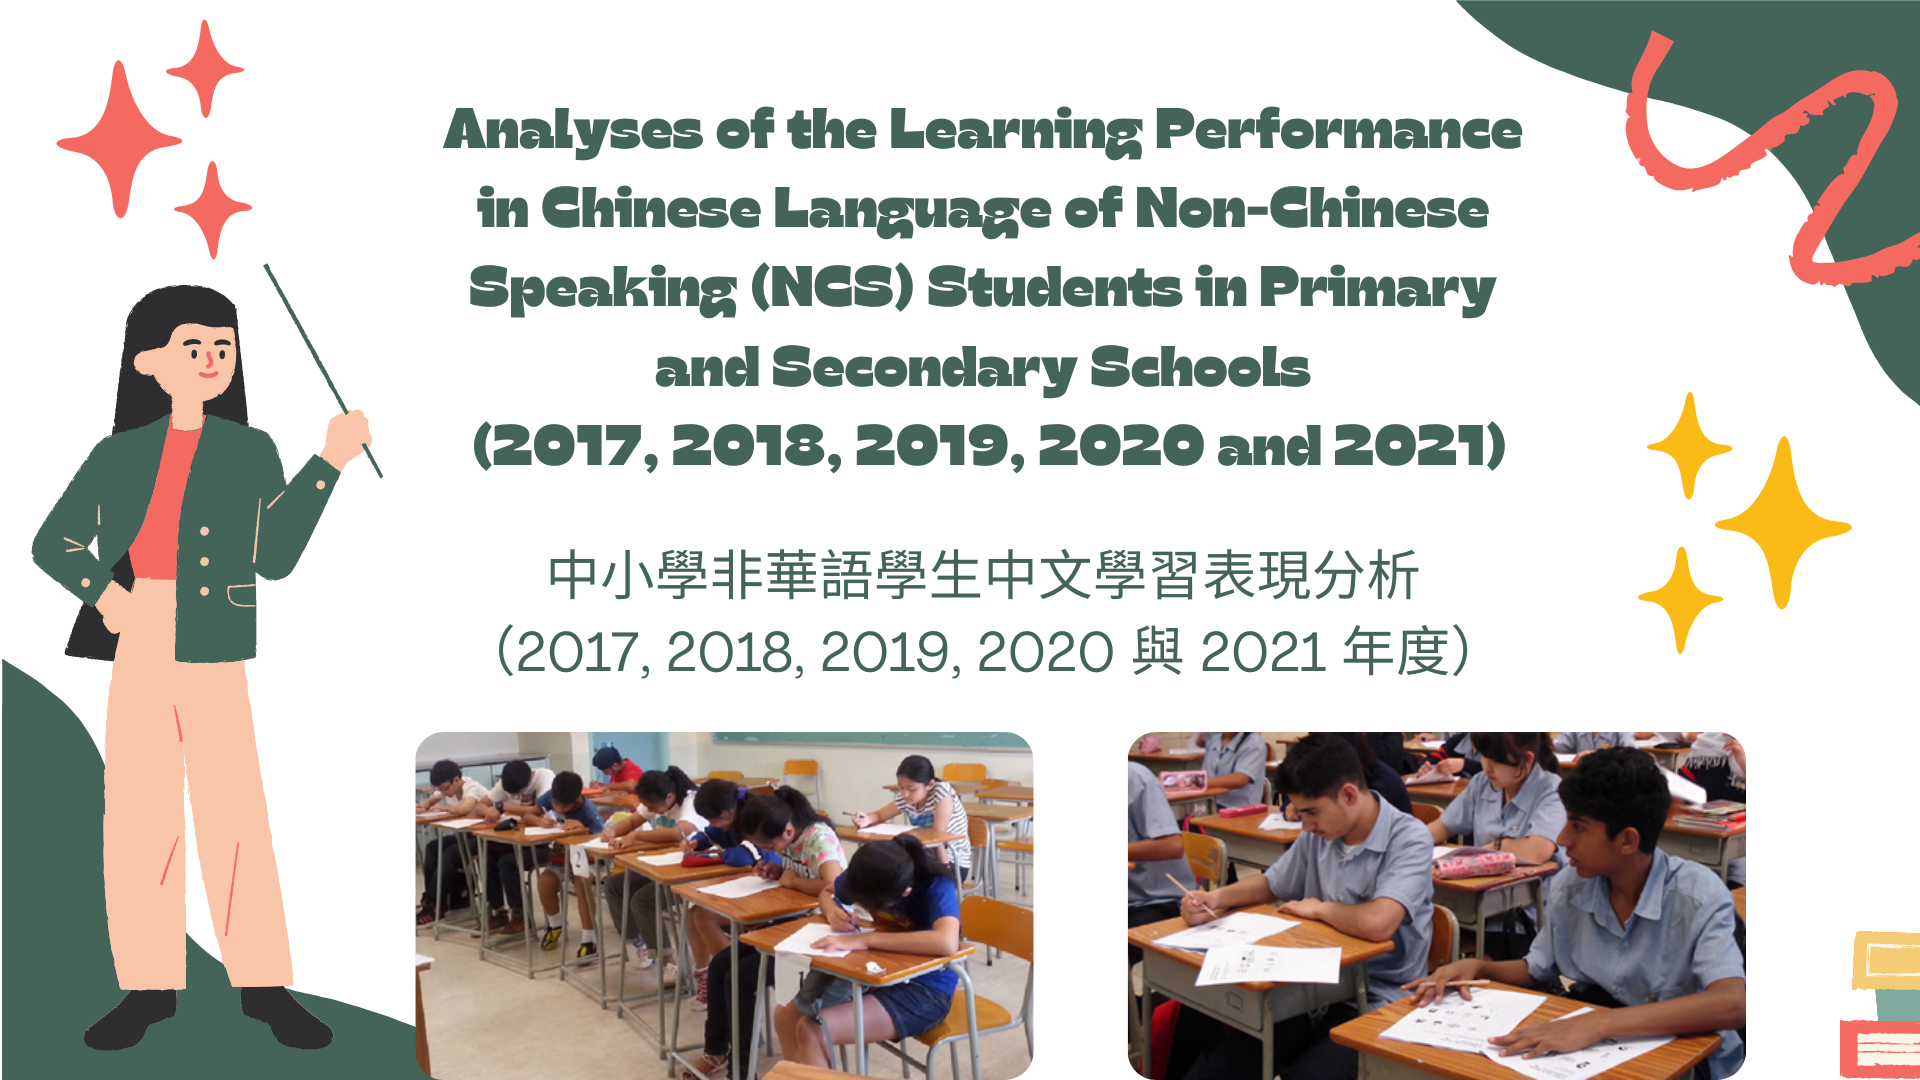 Analyses of the Learning Performance in Chinese Language of Non-Chinese Speaking (NCS) Students in Primary and Secondary Schools (2017, 2018, 2019, 2020 and 2021) title